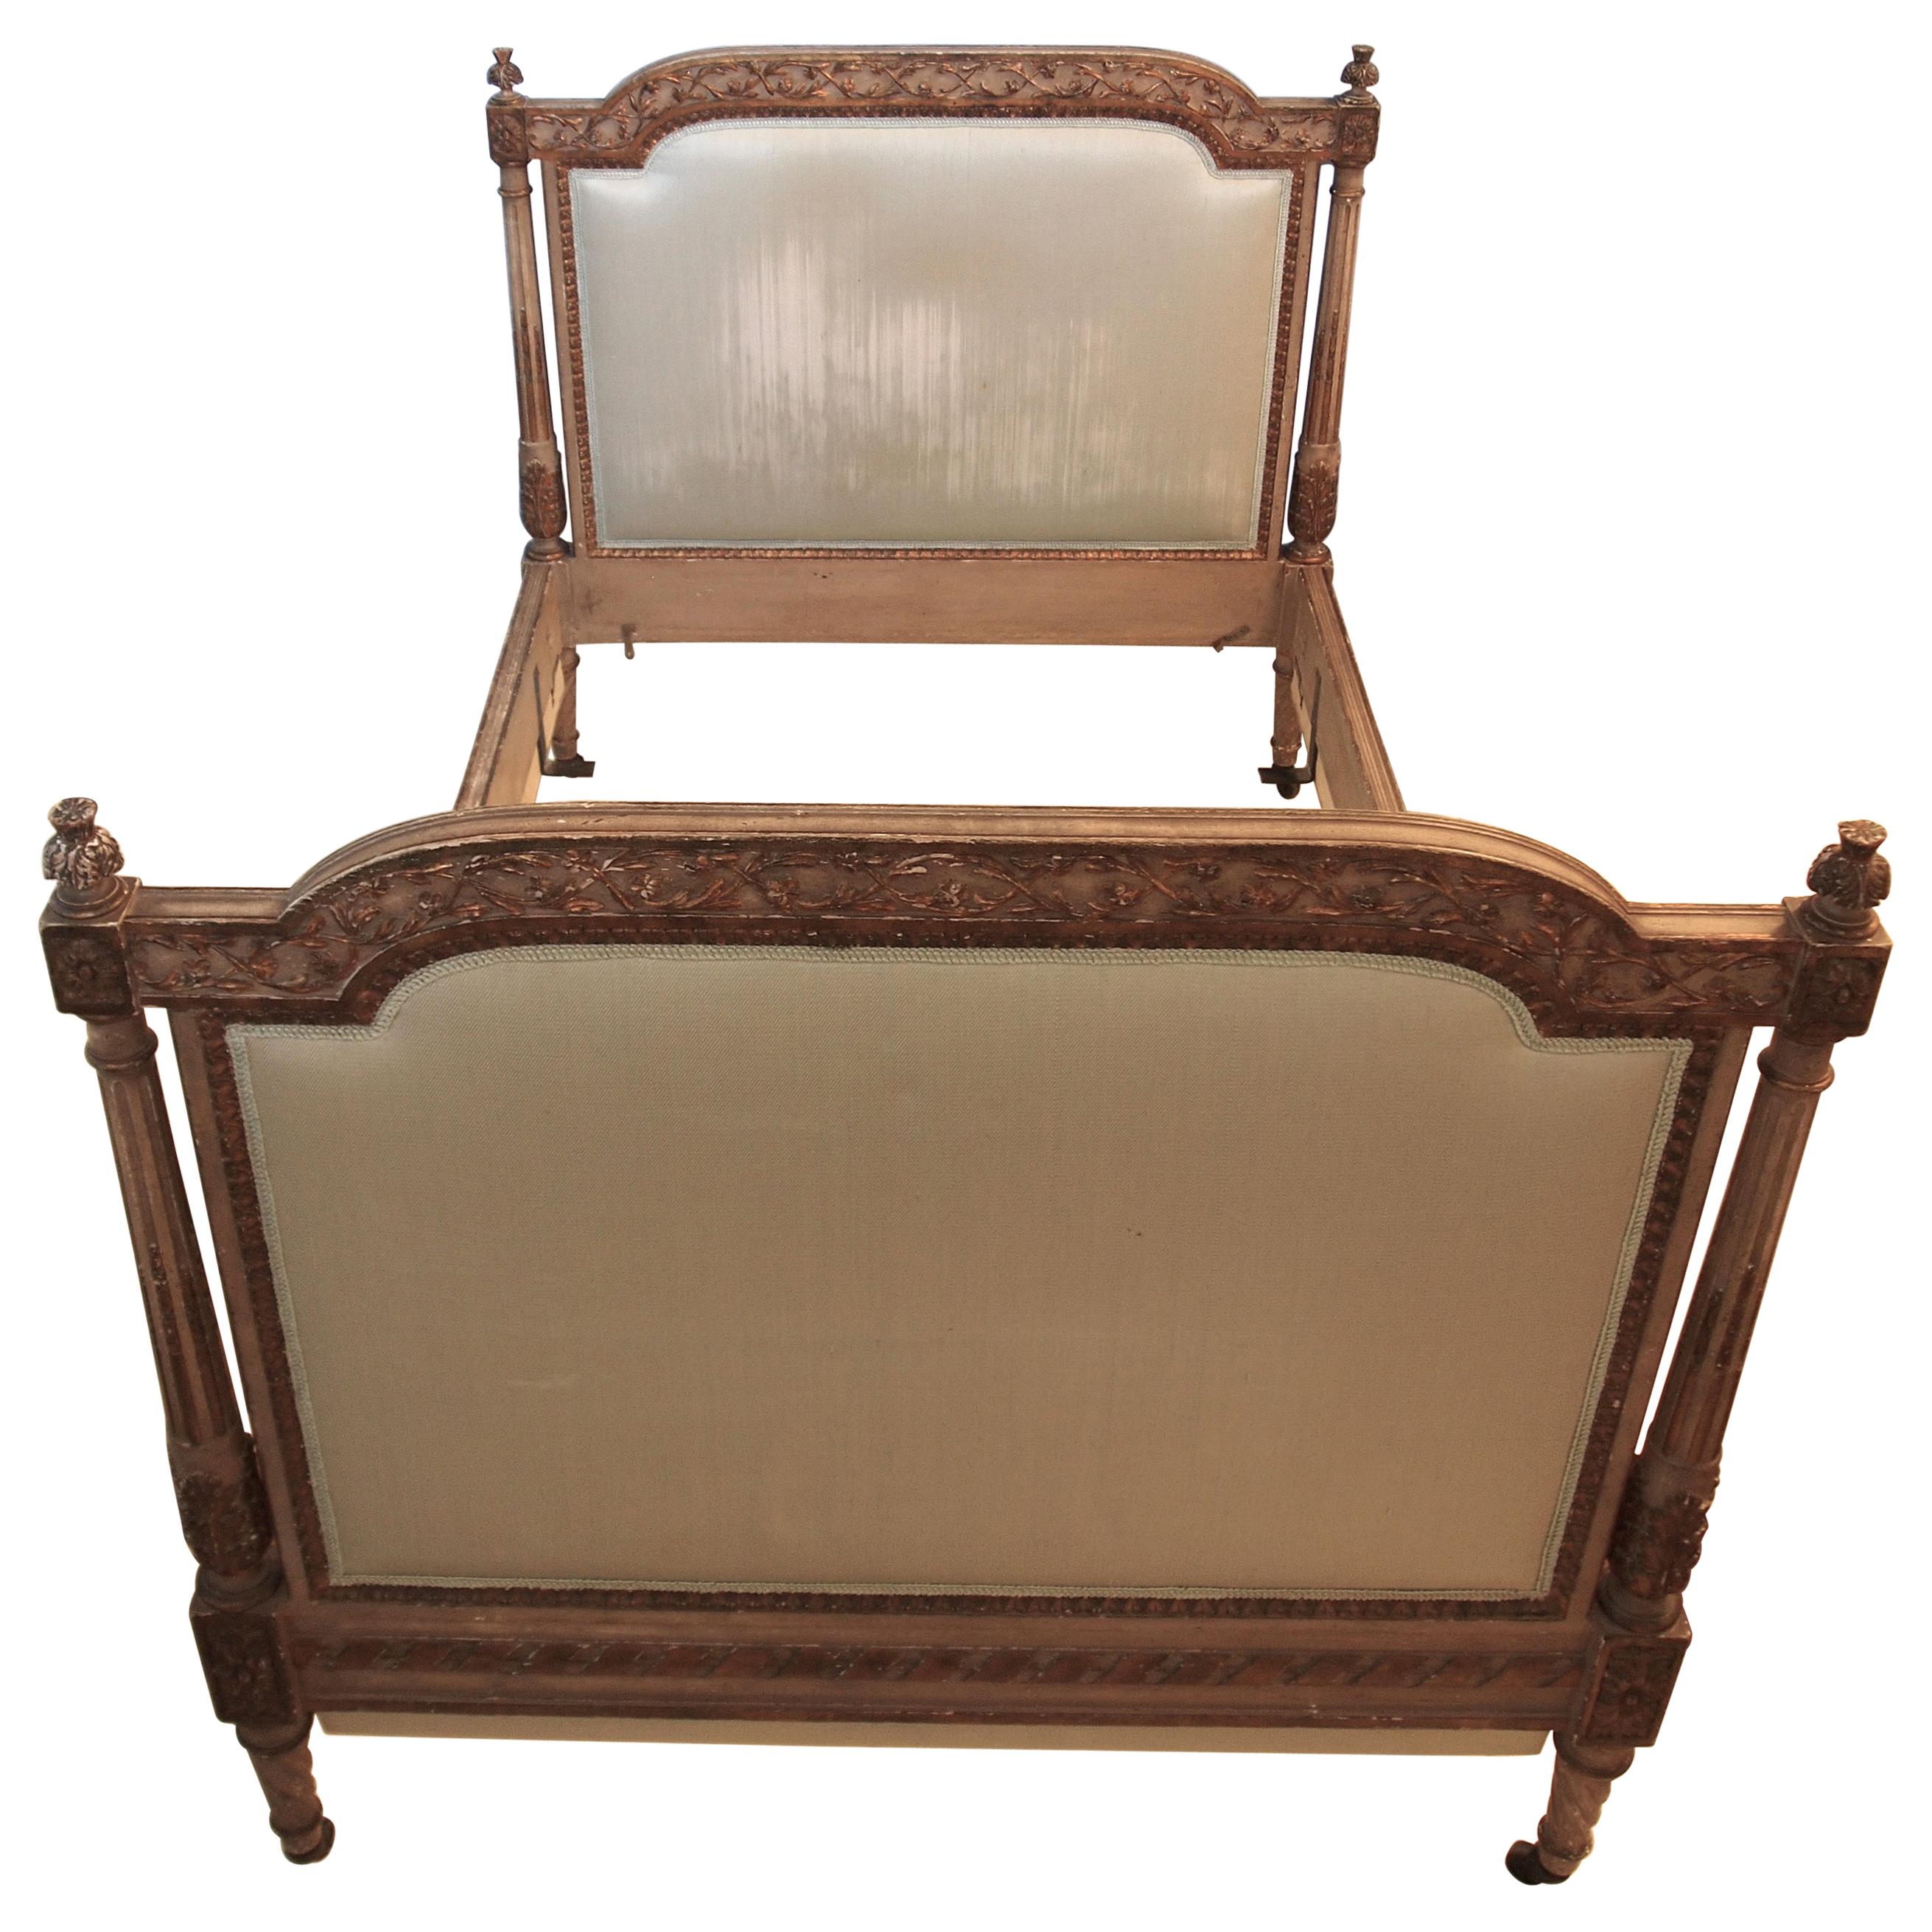 Louis XVl Style Parcel-Gilt and Painted Day Bed